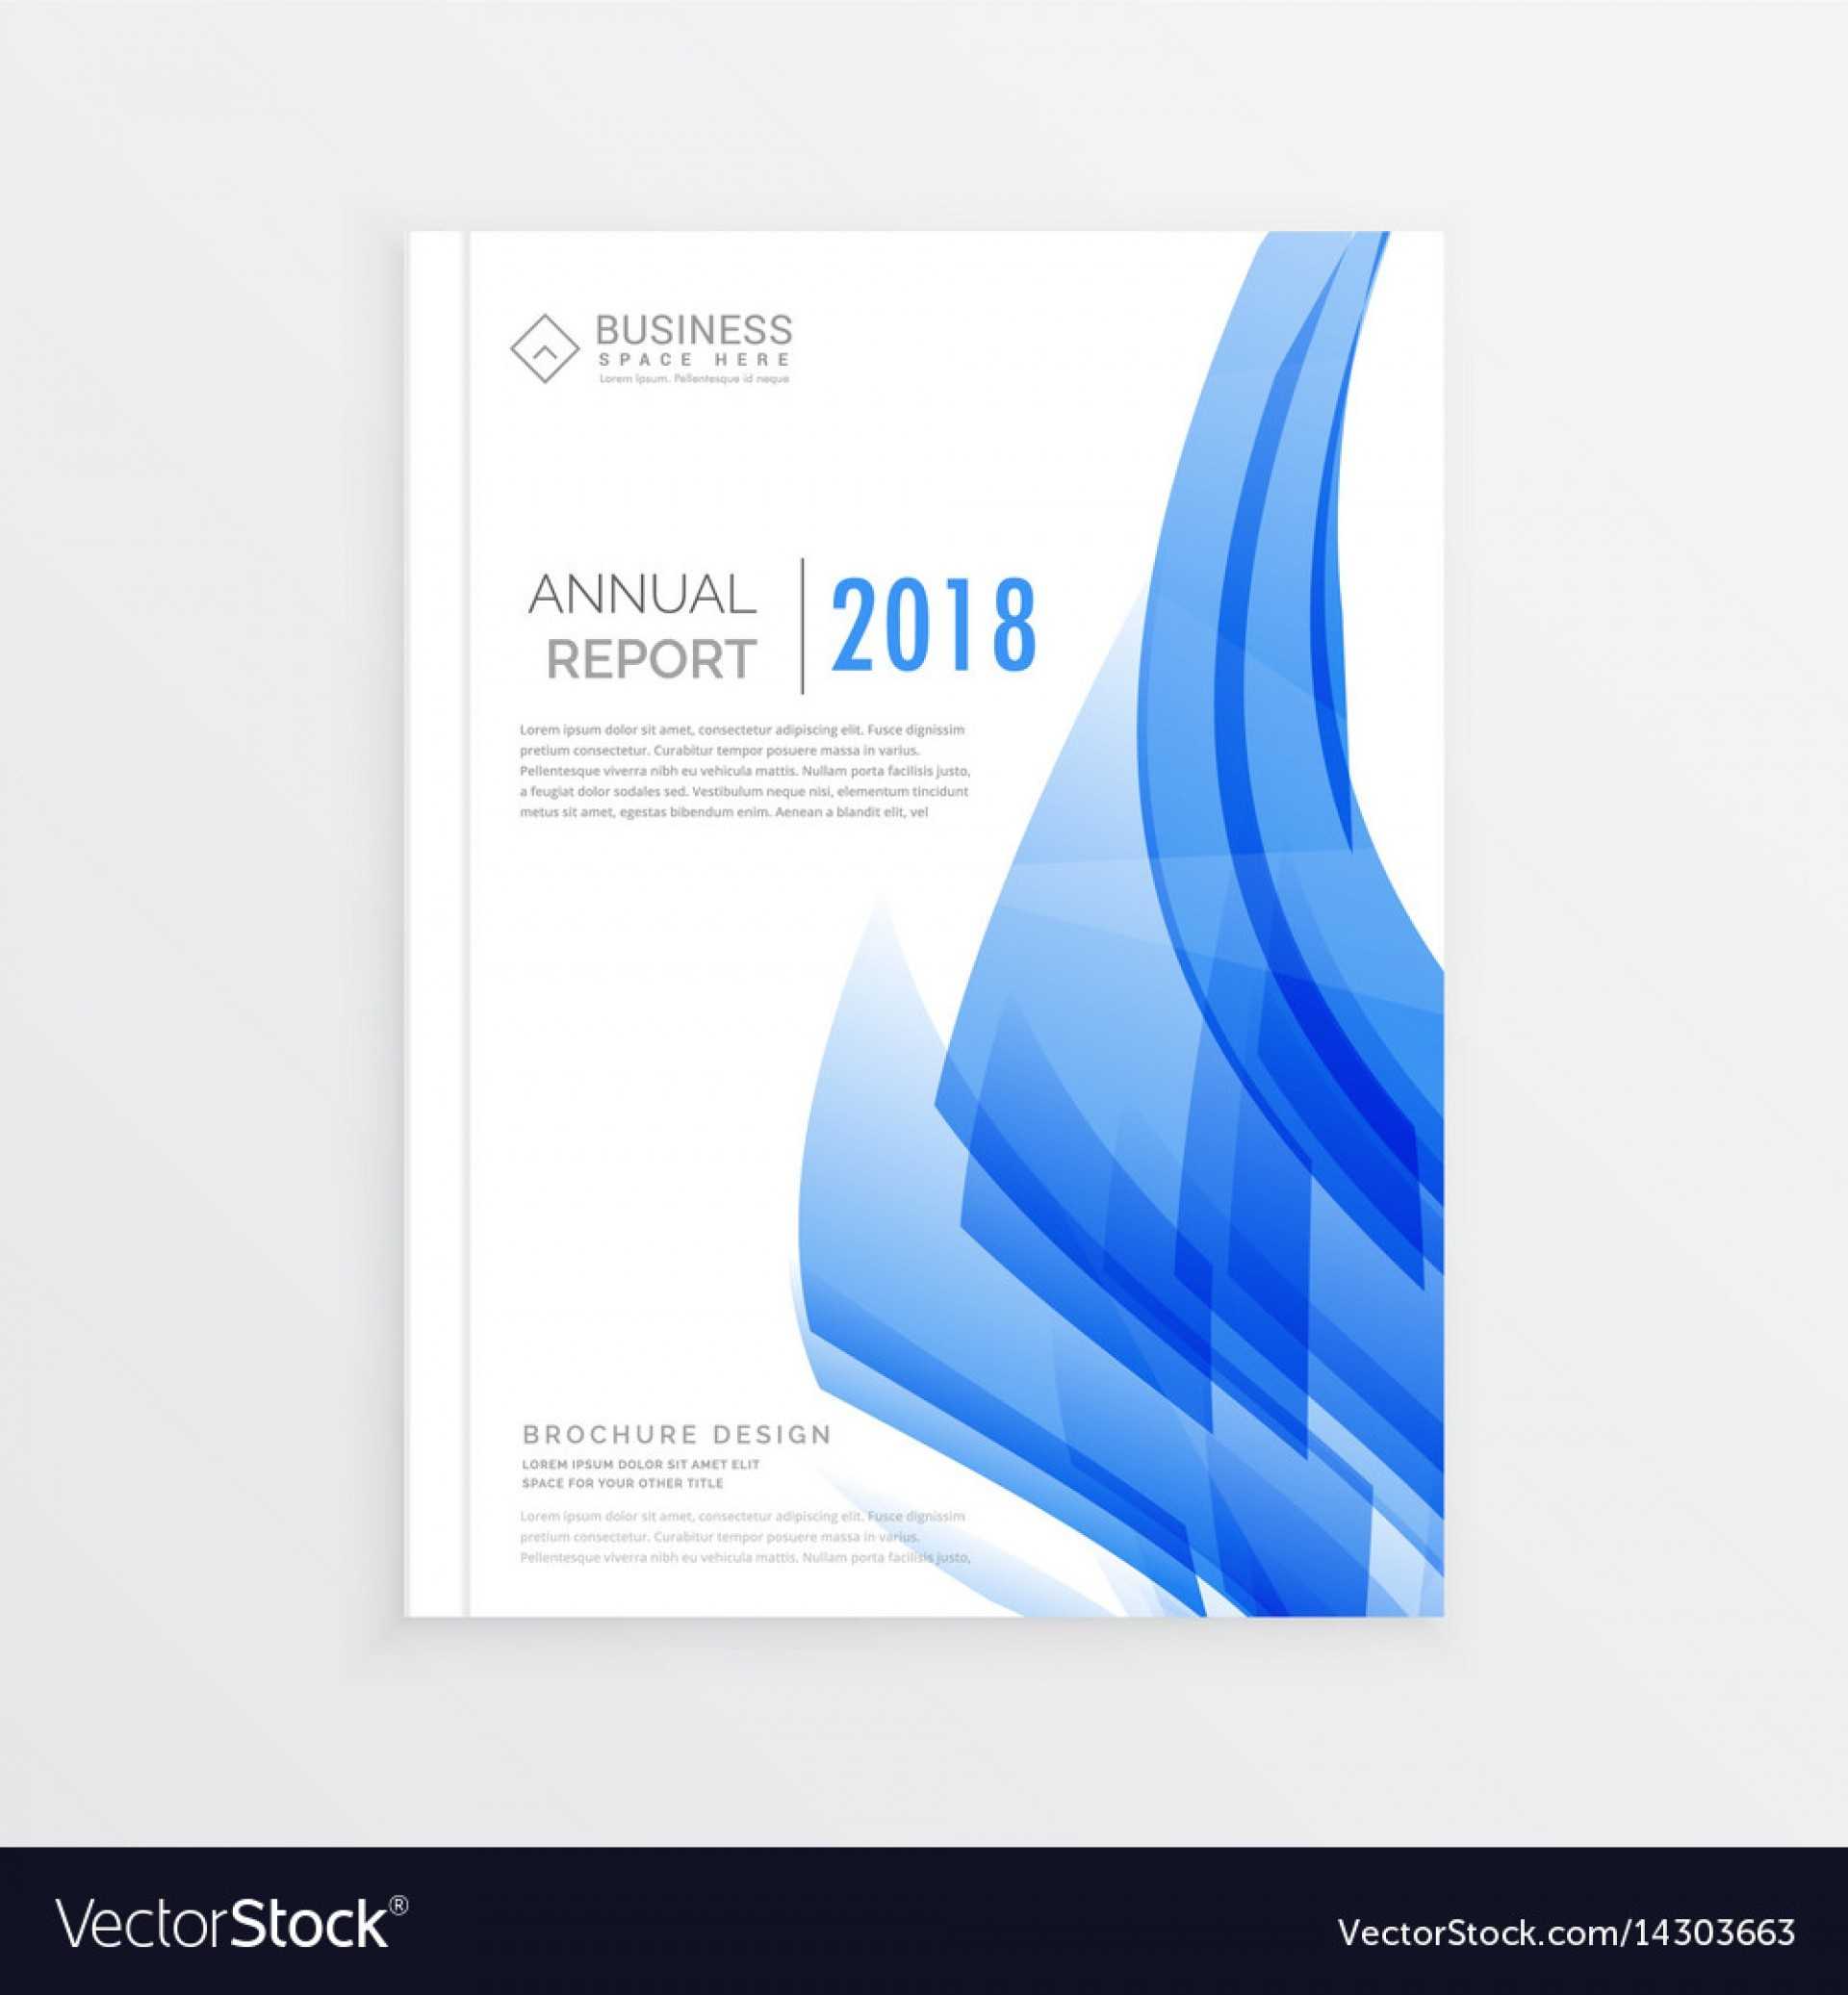 011 Template Ideas Report Cover Page Marvelous Annual Pertaining To Report Cover Page Template Word